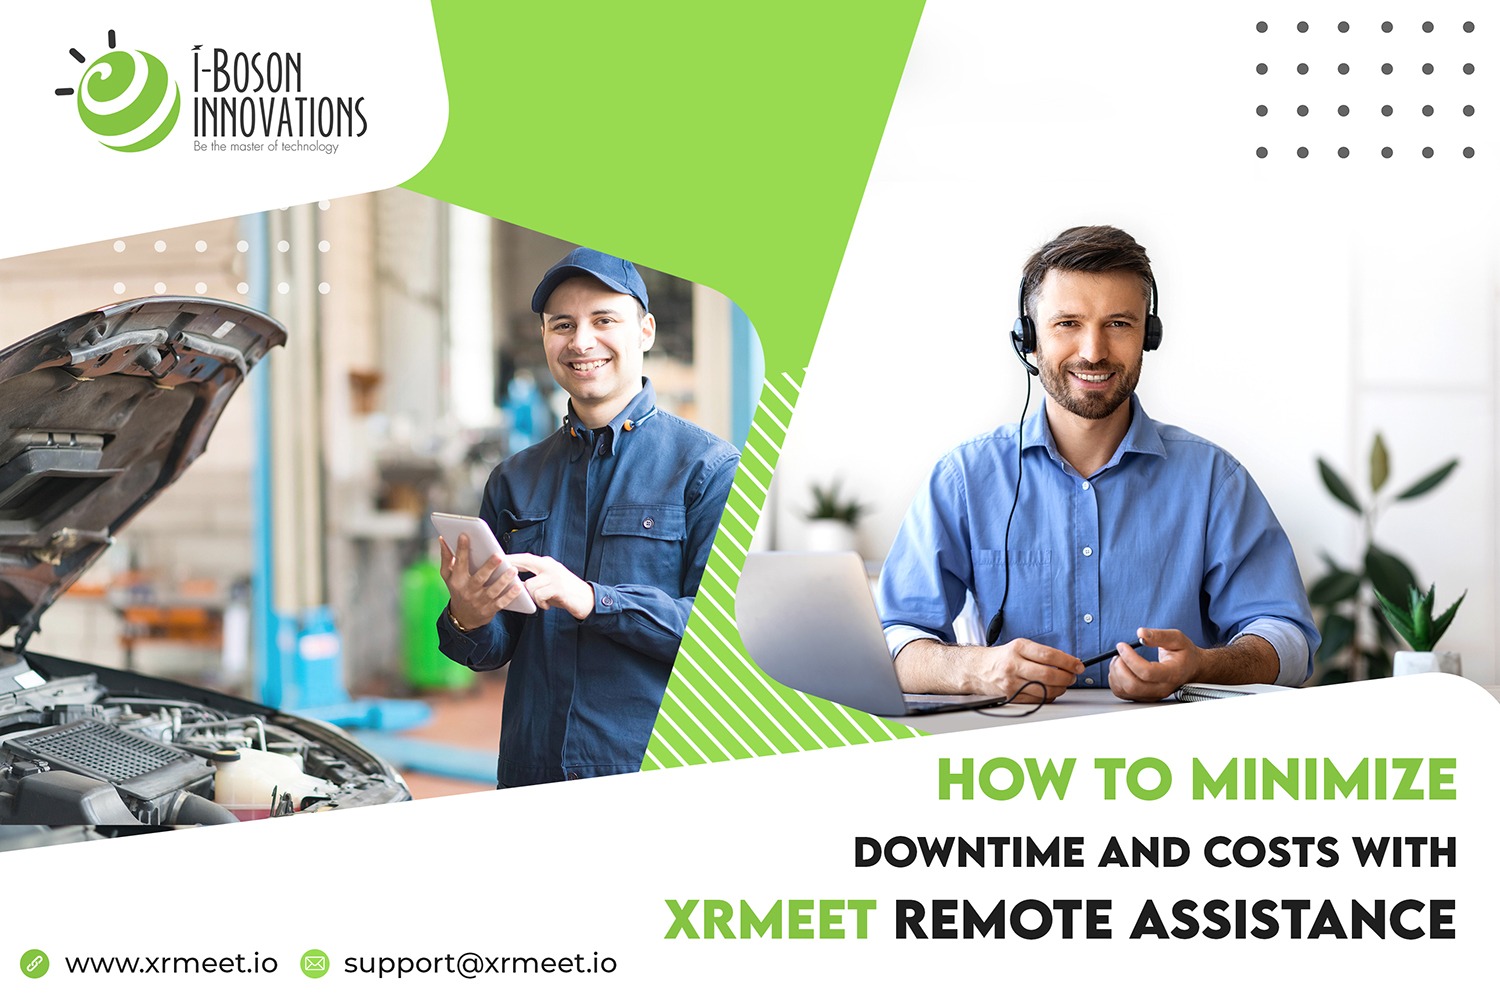 Minimize downtime and costs with XRmeet AR remote assistance
                       